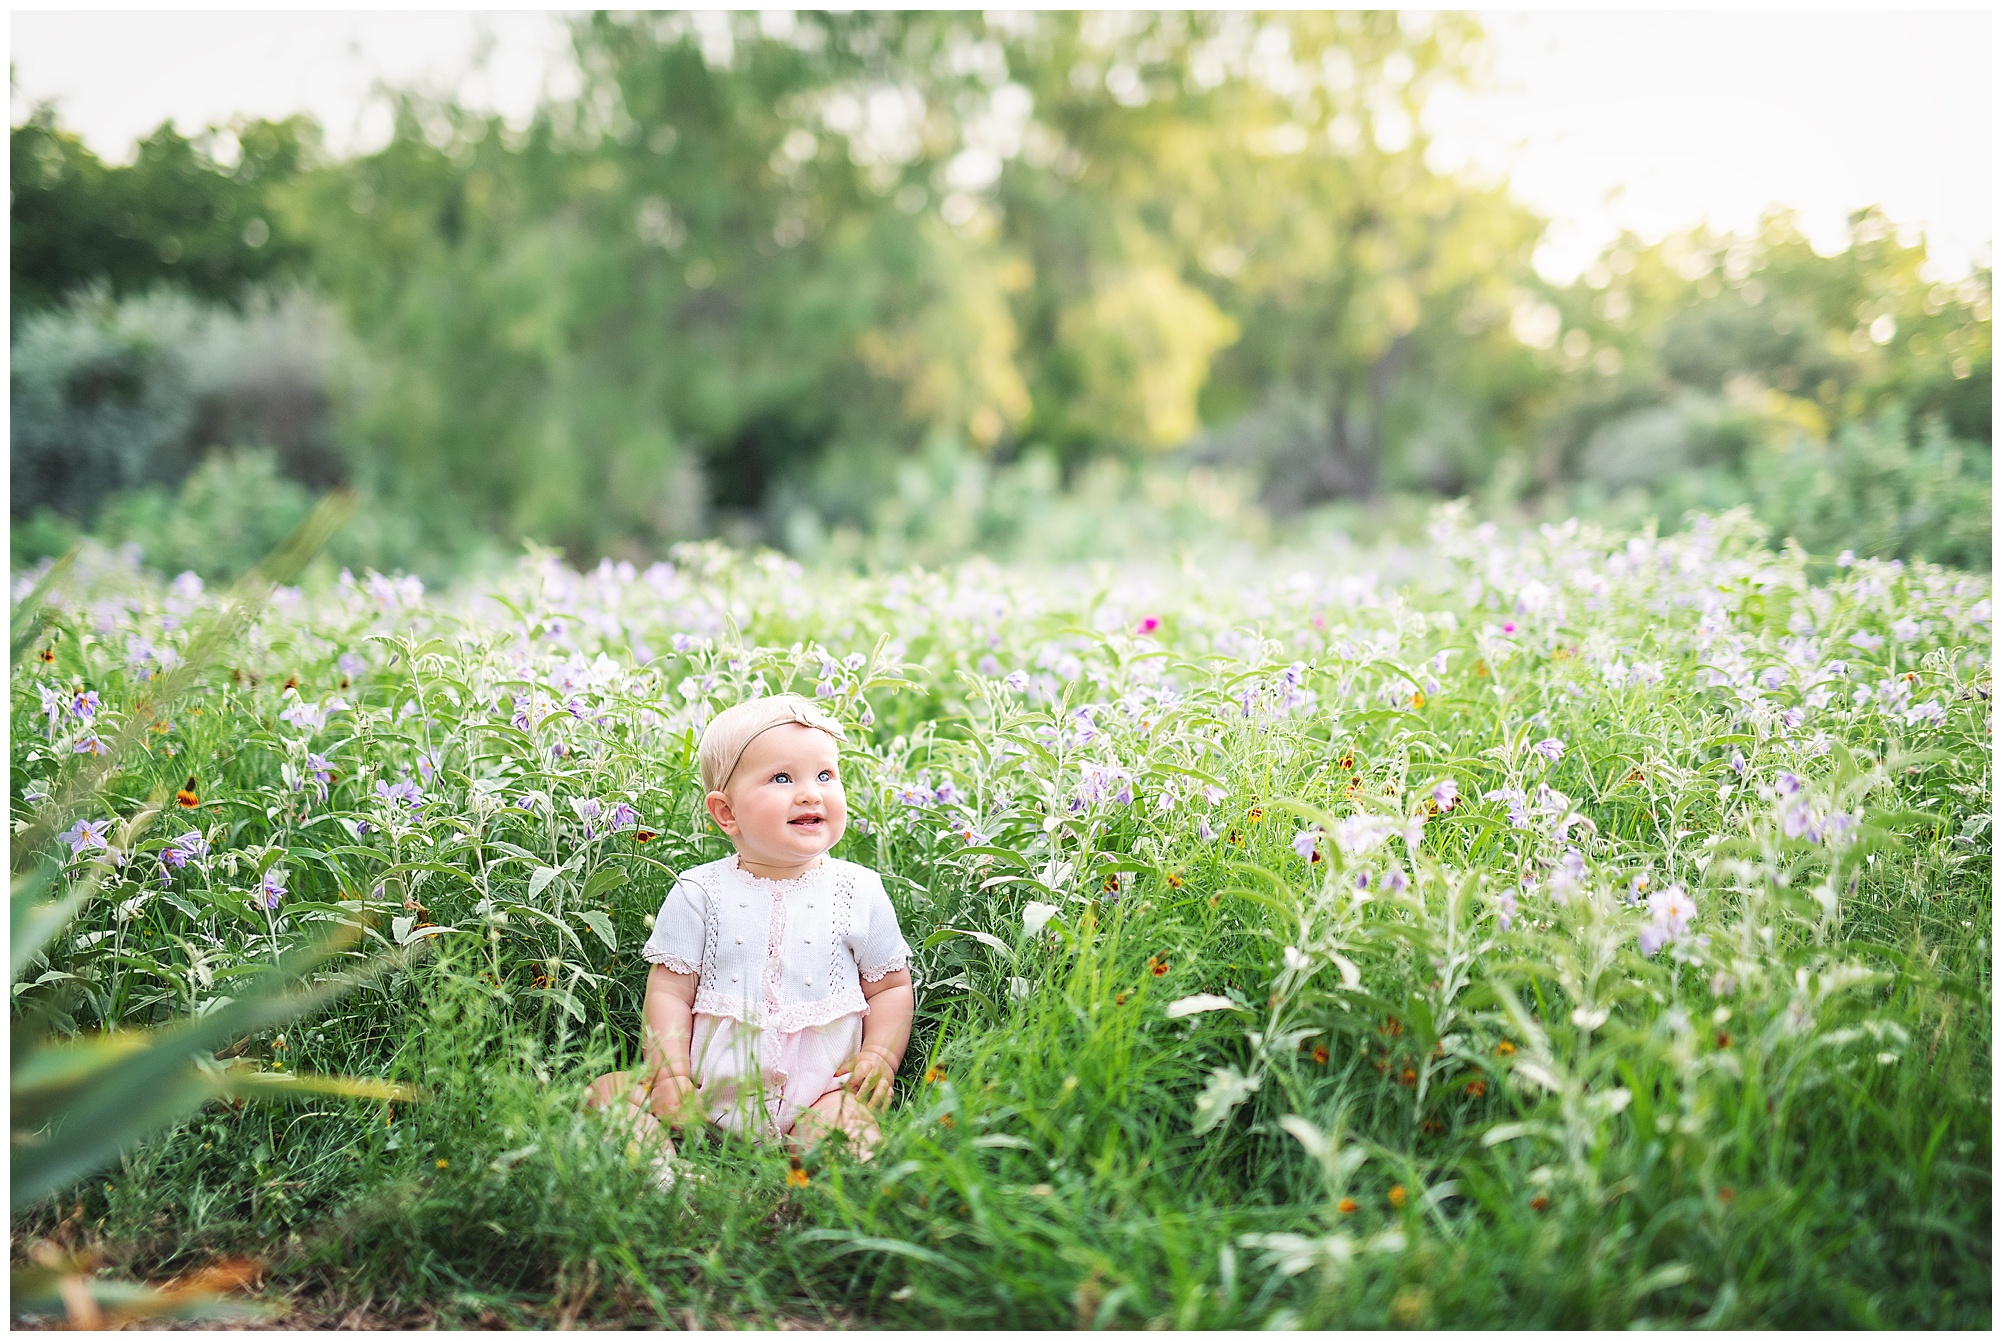 little girl in a sea of wildflowers smiling happily!